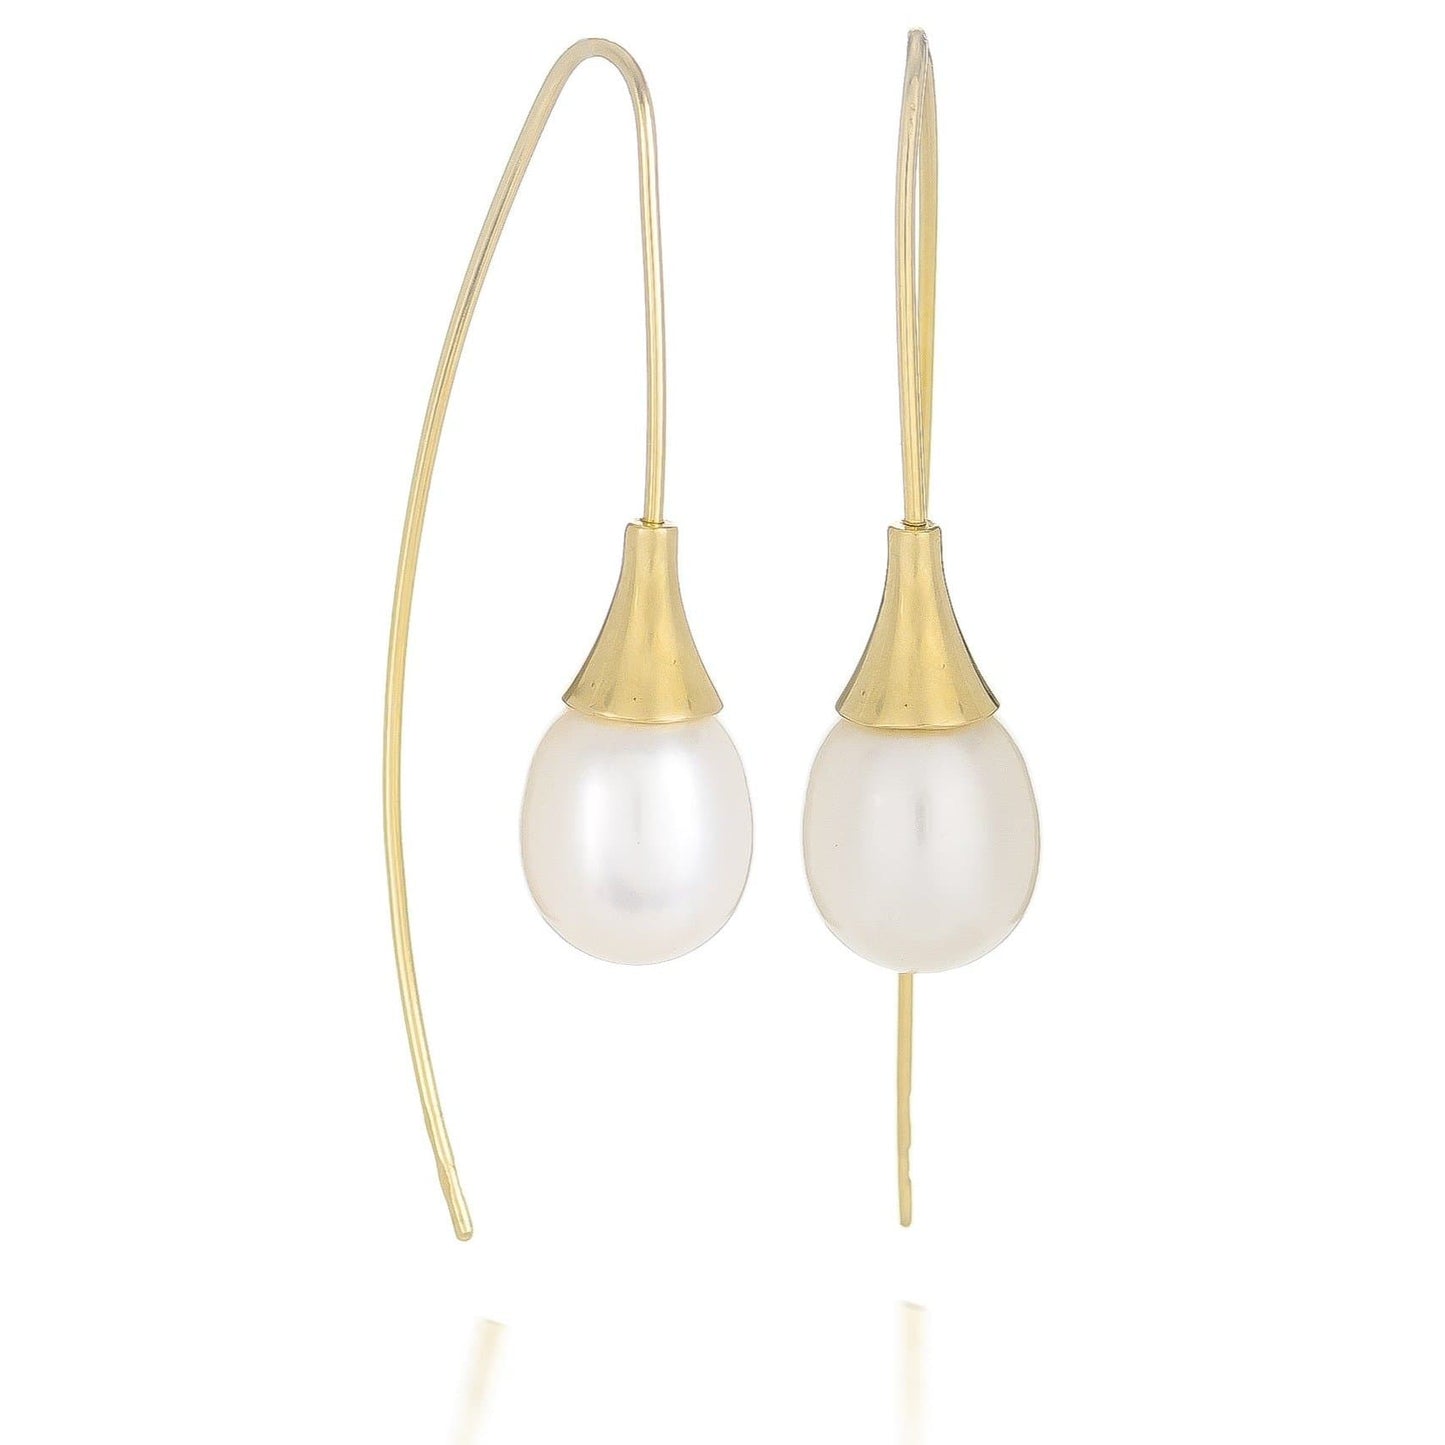 Dalia T Earrings Luster Collection 14KT Yellow Gold  Pearl Drop Earrings